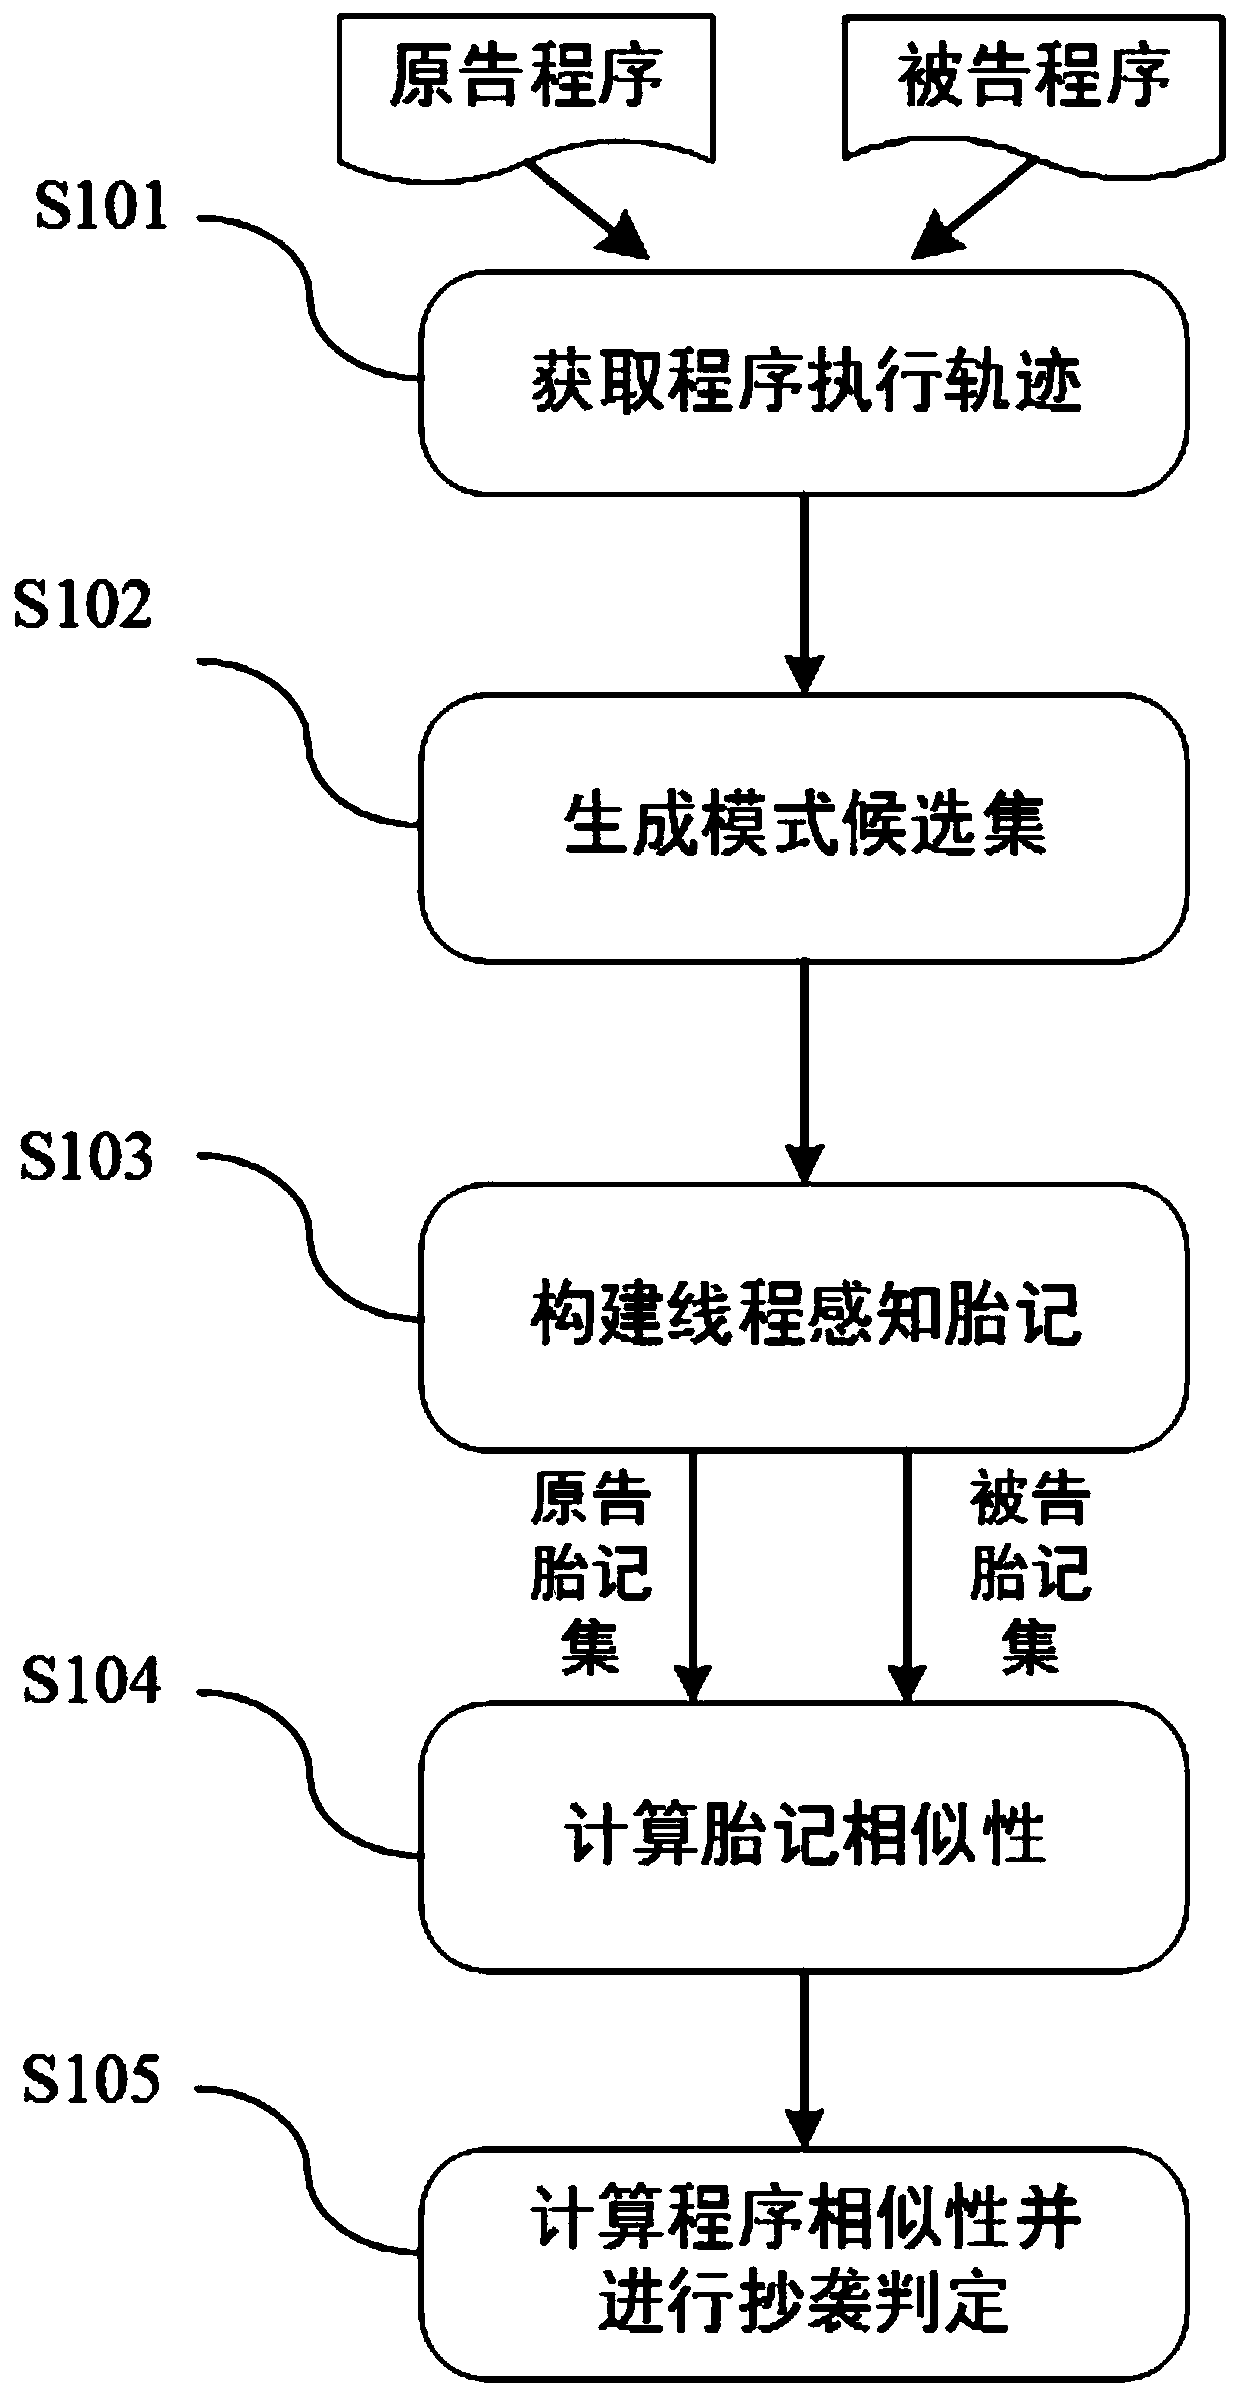 Multi-thread program plagiarism detection method based on frequent pattern mining